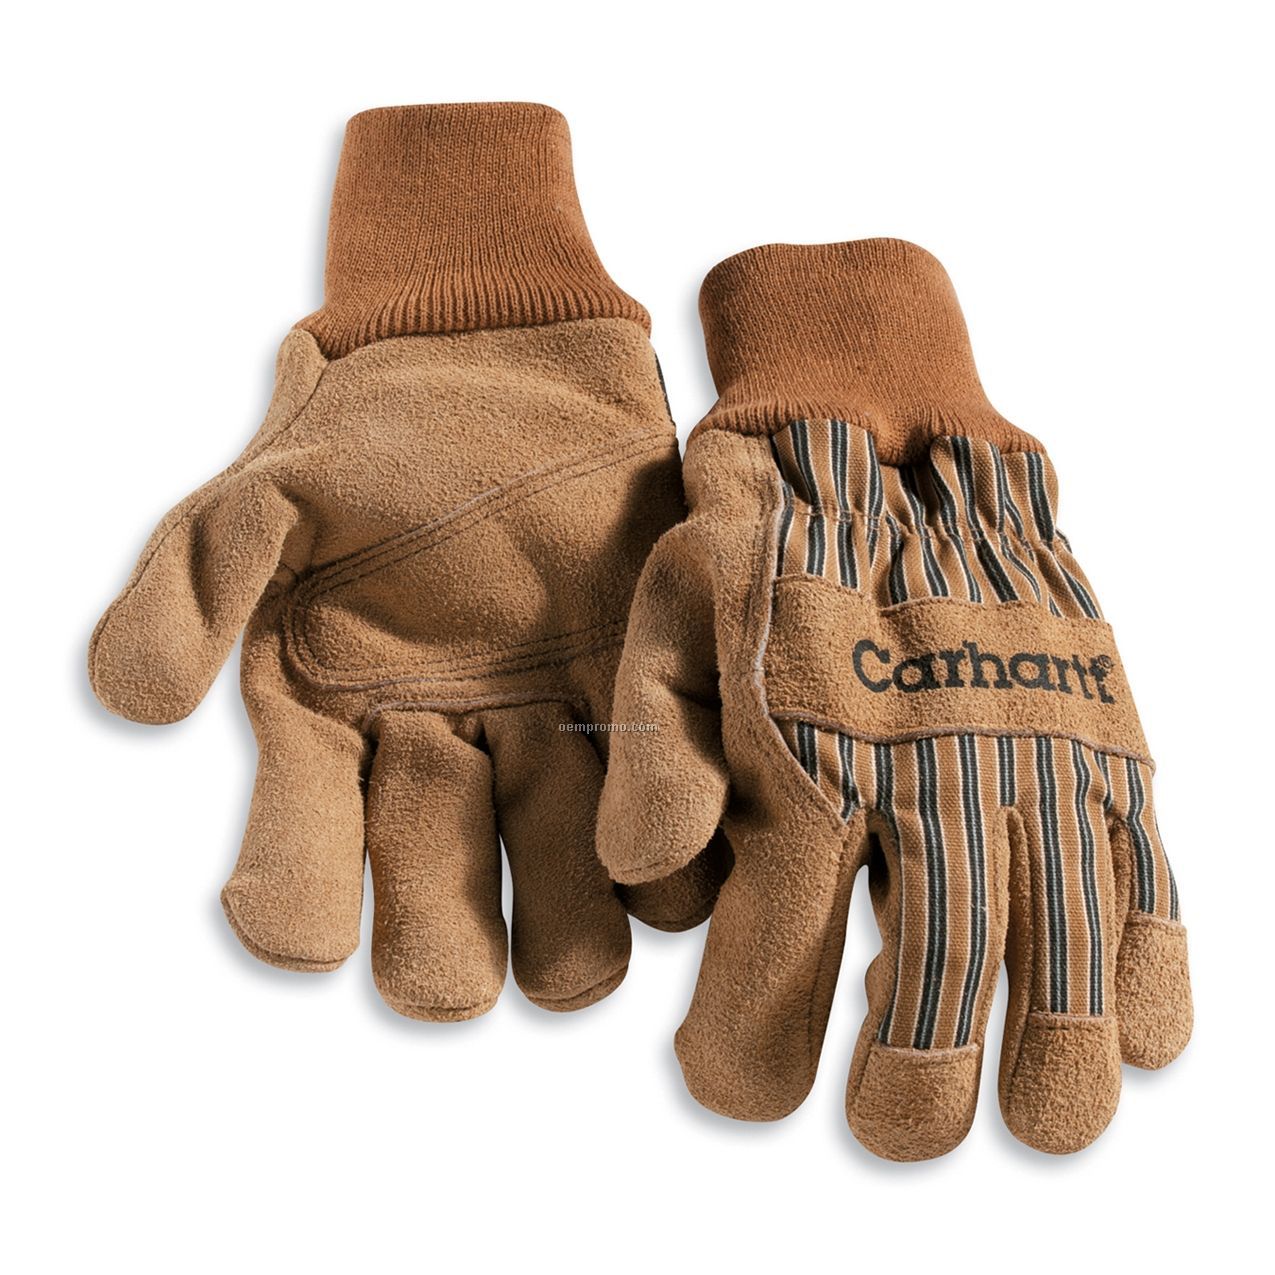 Carhartt Men's Knit Wrist Glove With Striped Top / Suede Cowhide